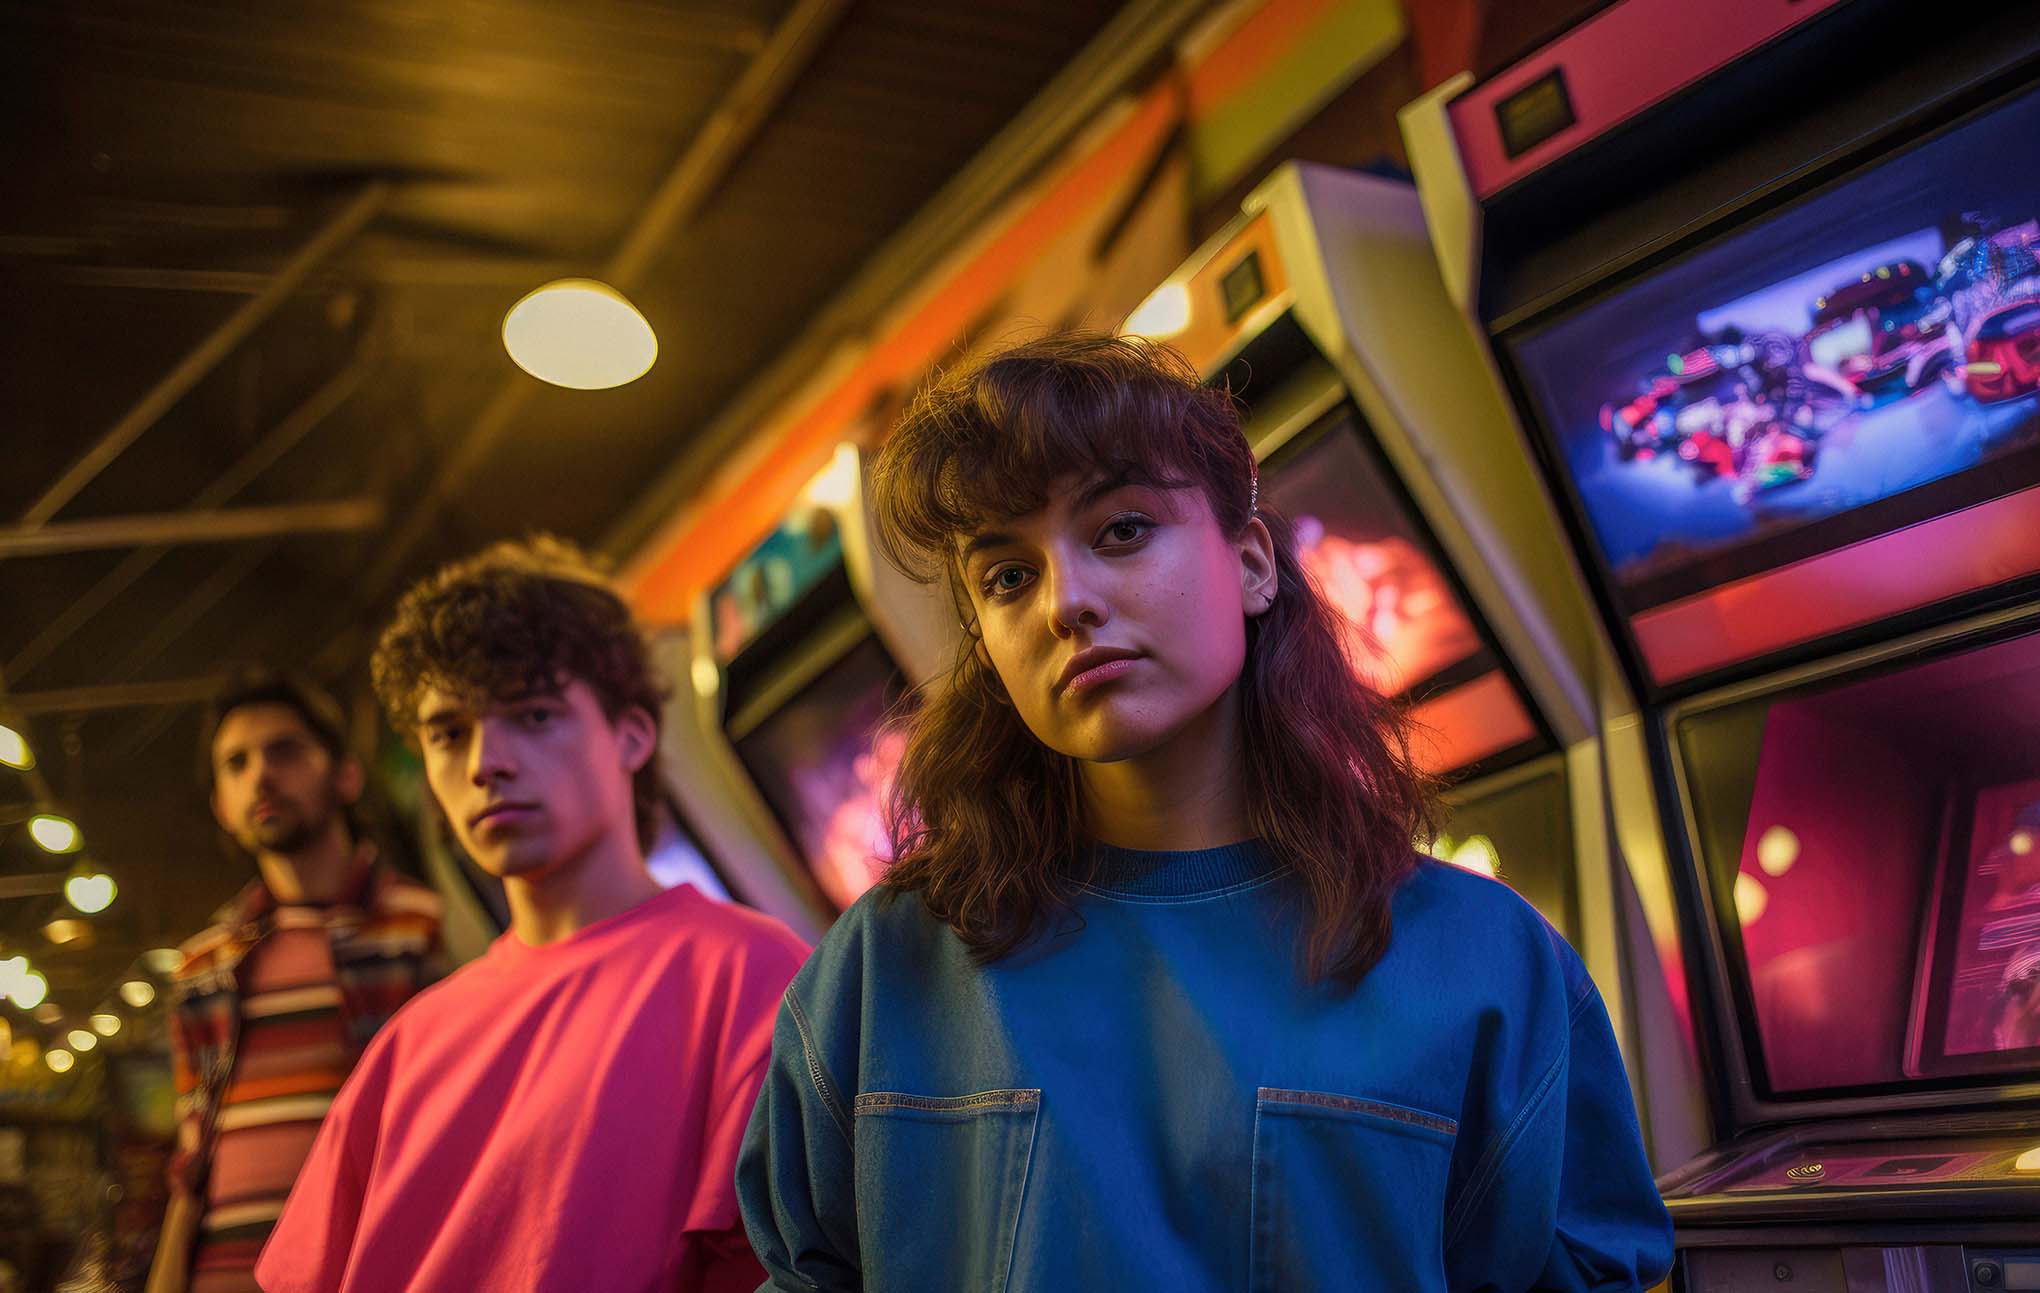 Three young adults stand in an arcade, illuminated by colorful arcade games and overhead lights,.